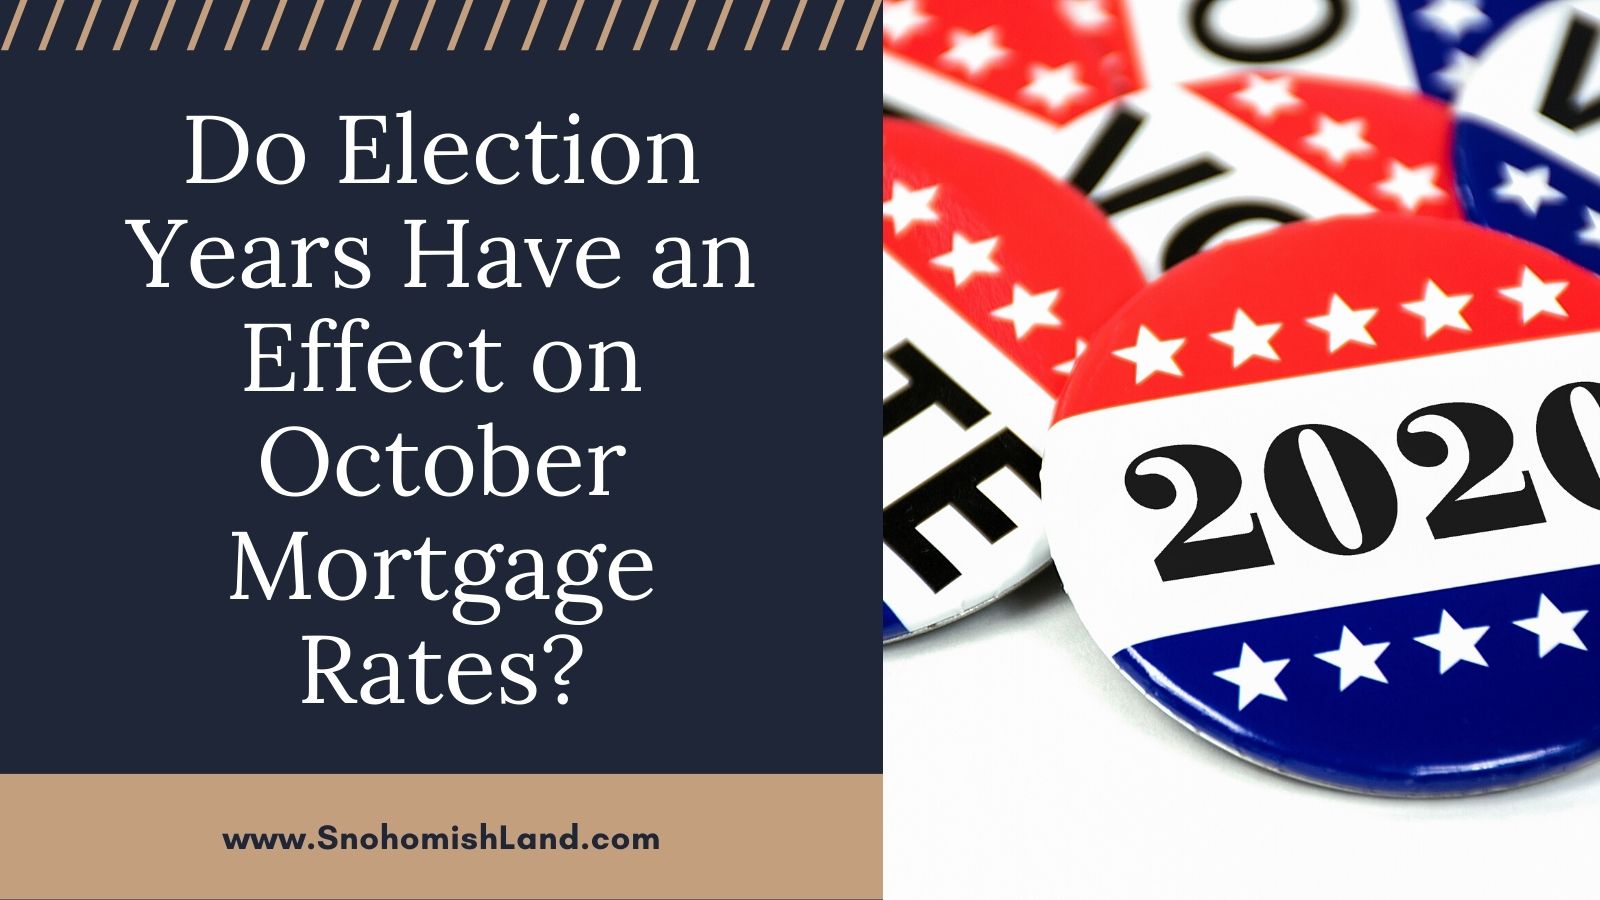 Do Election Years Have an Effect on October Mortgage Rates?